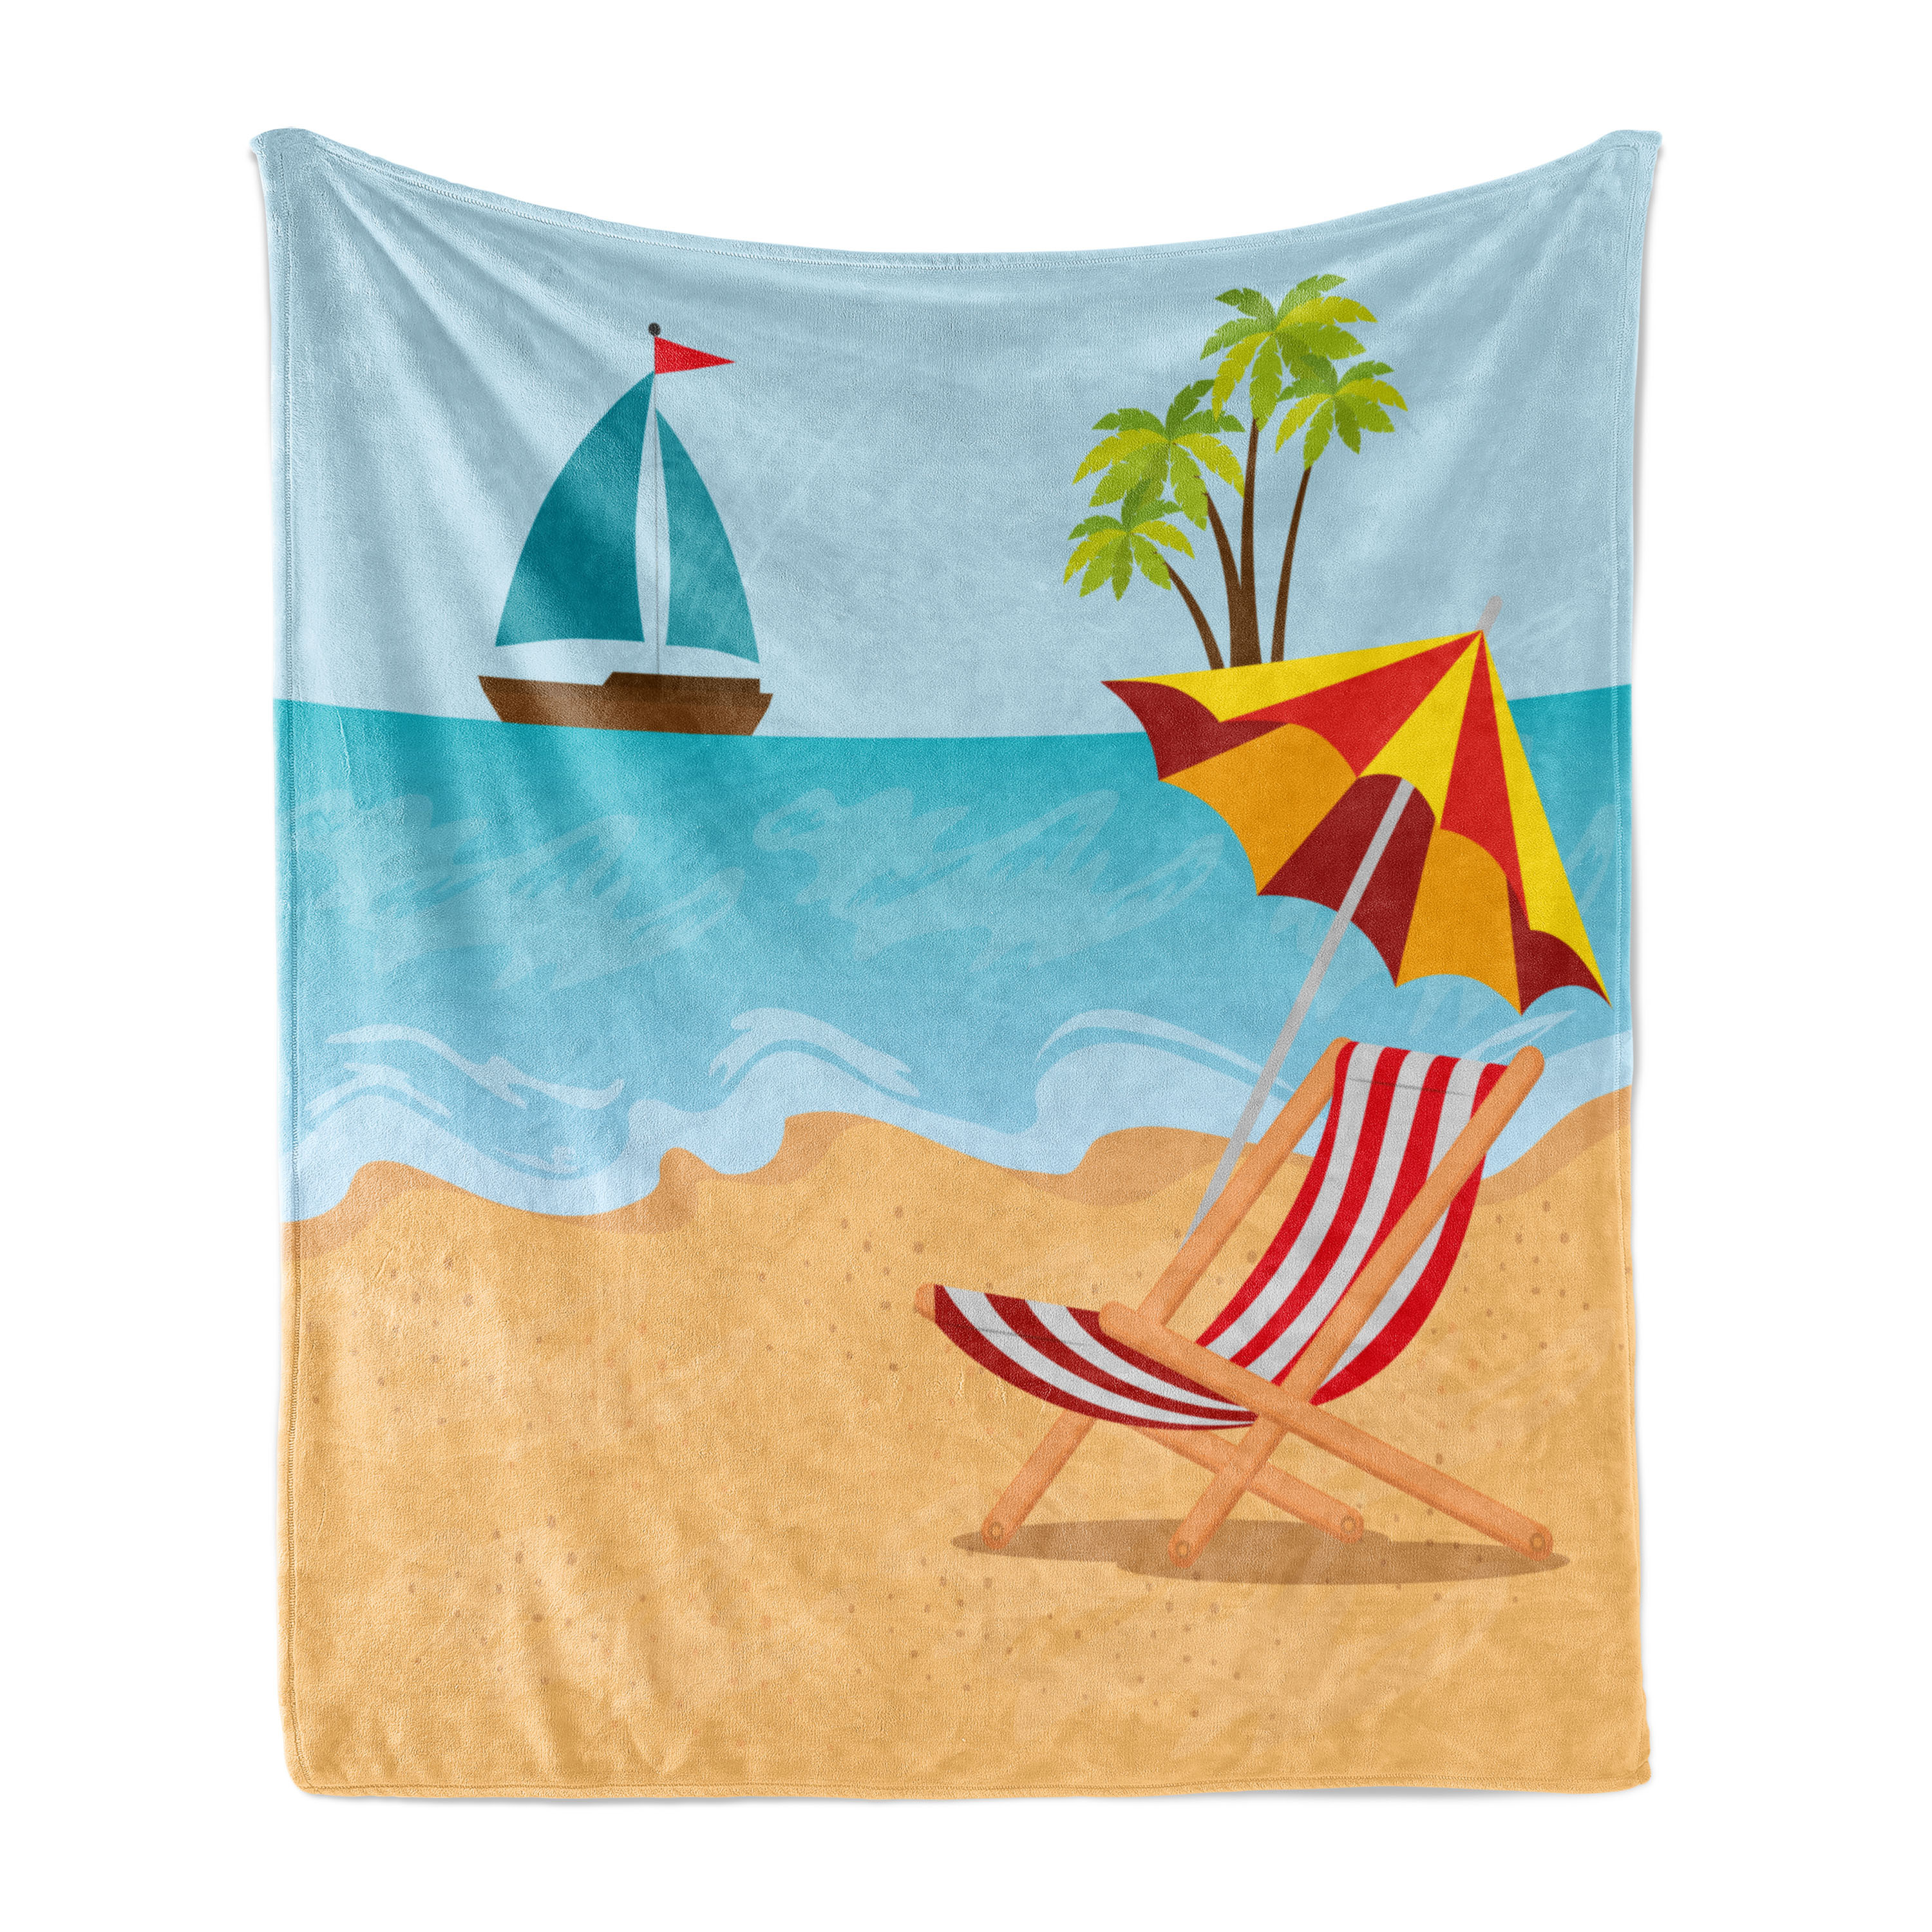 Graphic Beach Soft Flannel Fleece Blanket, Summer Leisure Scene at Coast Ocean Sailboat Parasol and Chair Cartoon Style, Cozy Plush for Indoor and Outdoor Use, 50" x 60", Multicolor, by Ambesonne - image 1 of 5